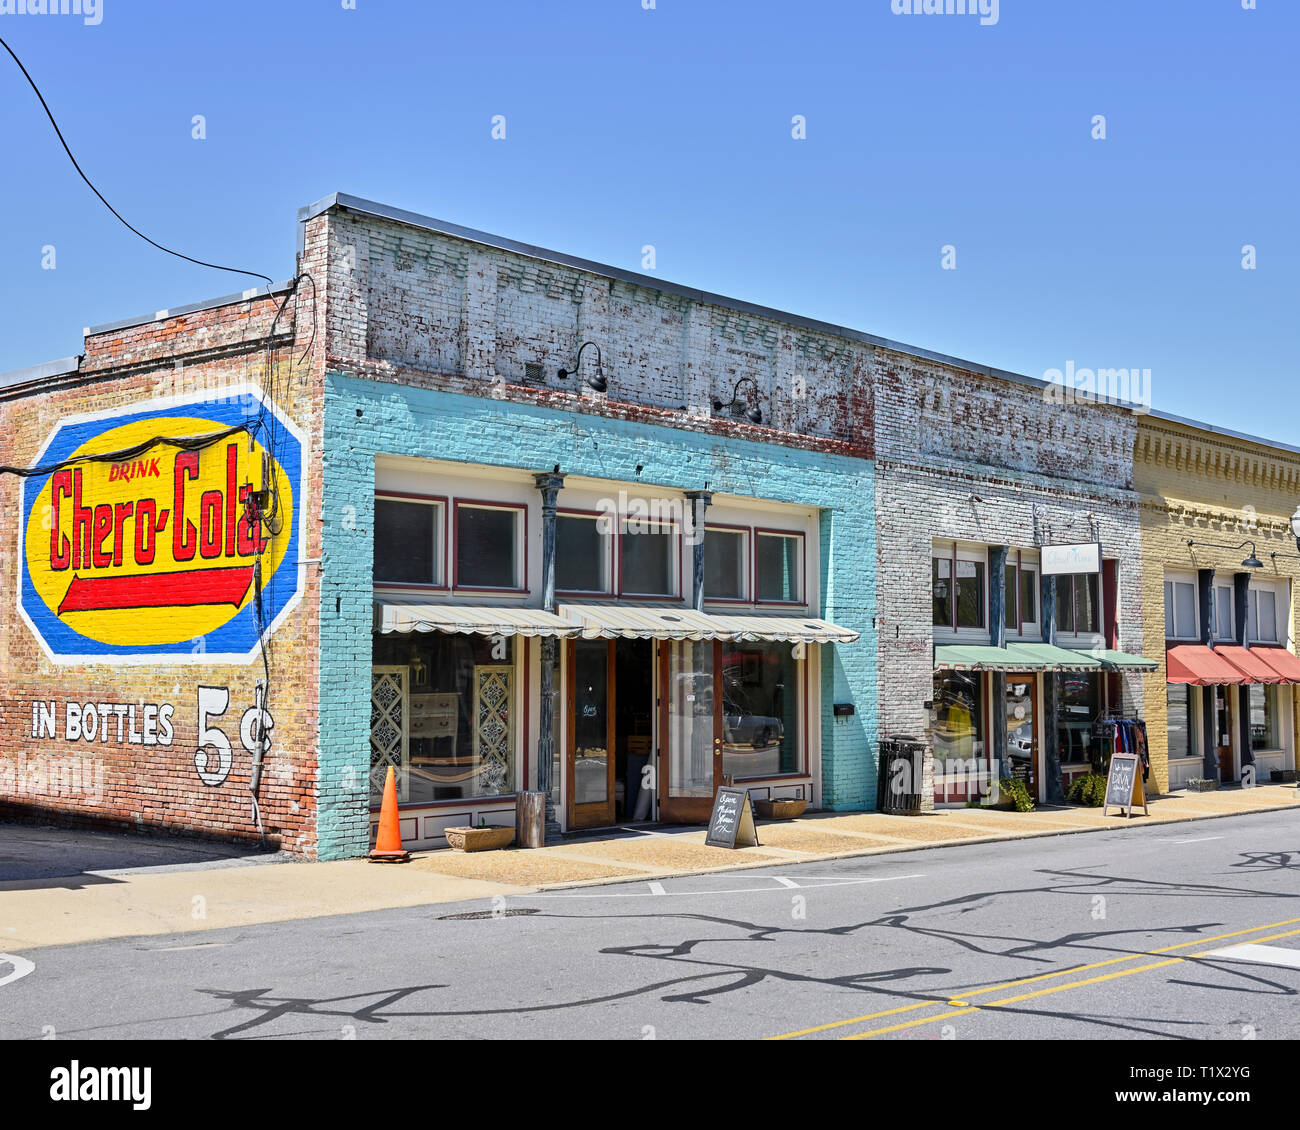 Small town USA stores, shops or storefronts with painted advertising on the building in Alexander City Alabama, USA. Stock Photo